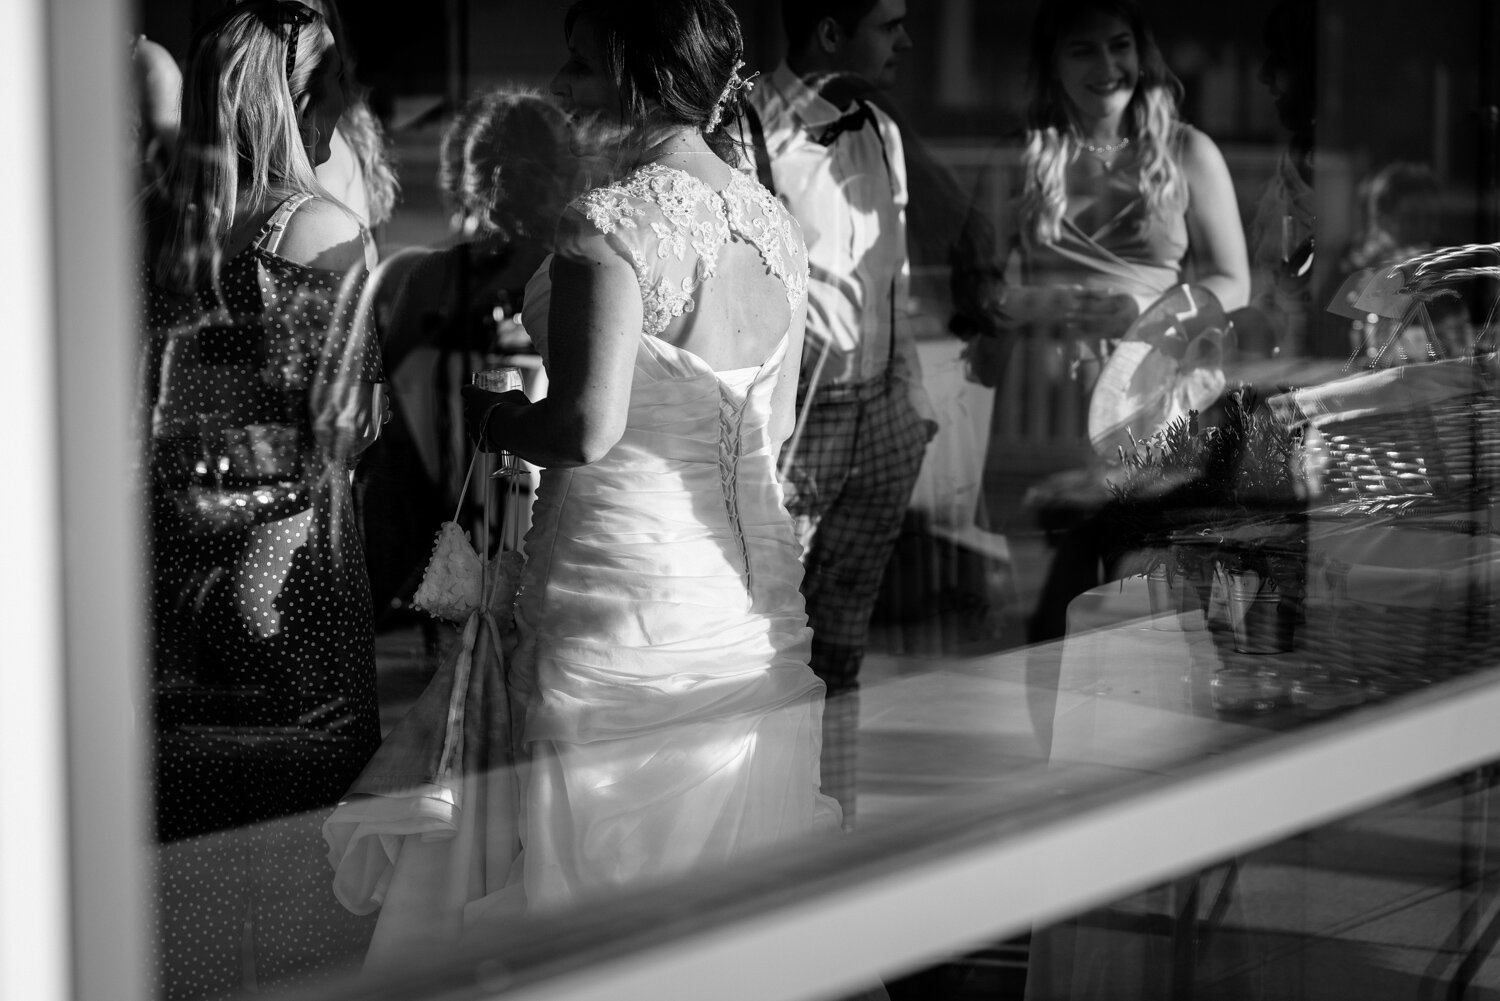 Reflection of brides dress in window 